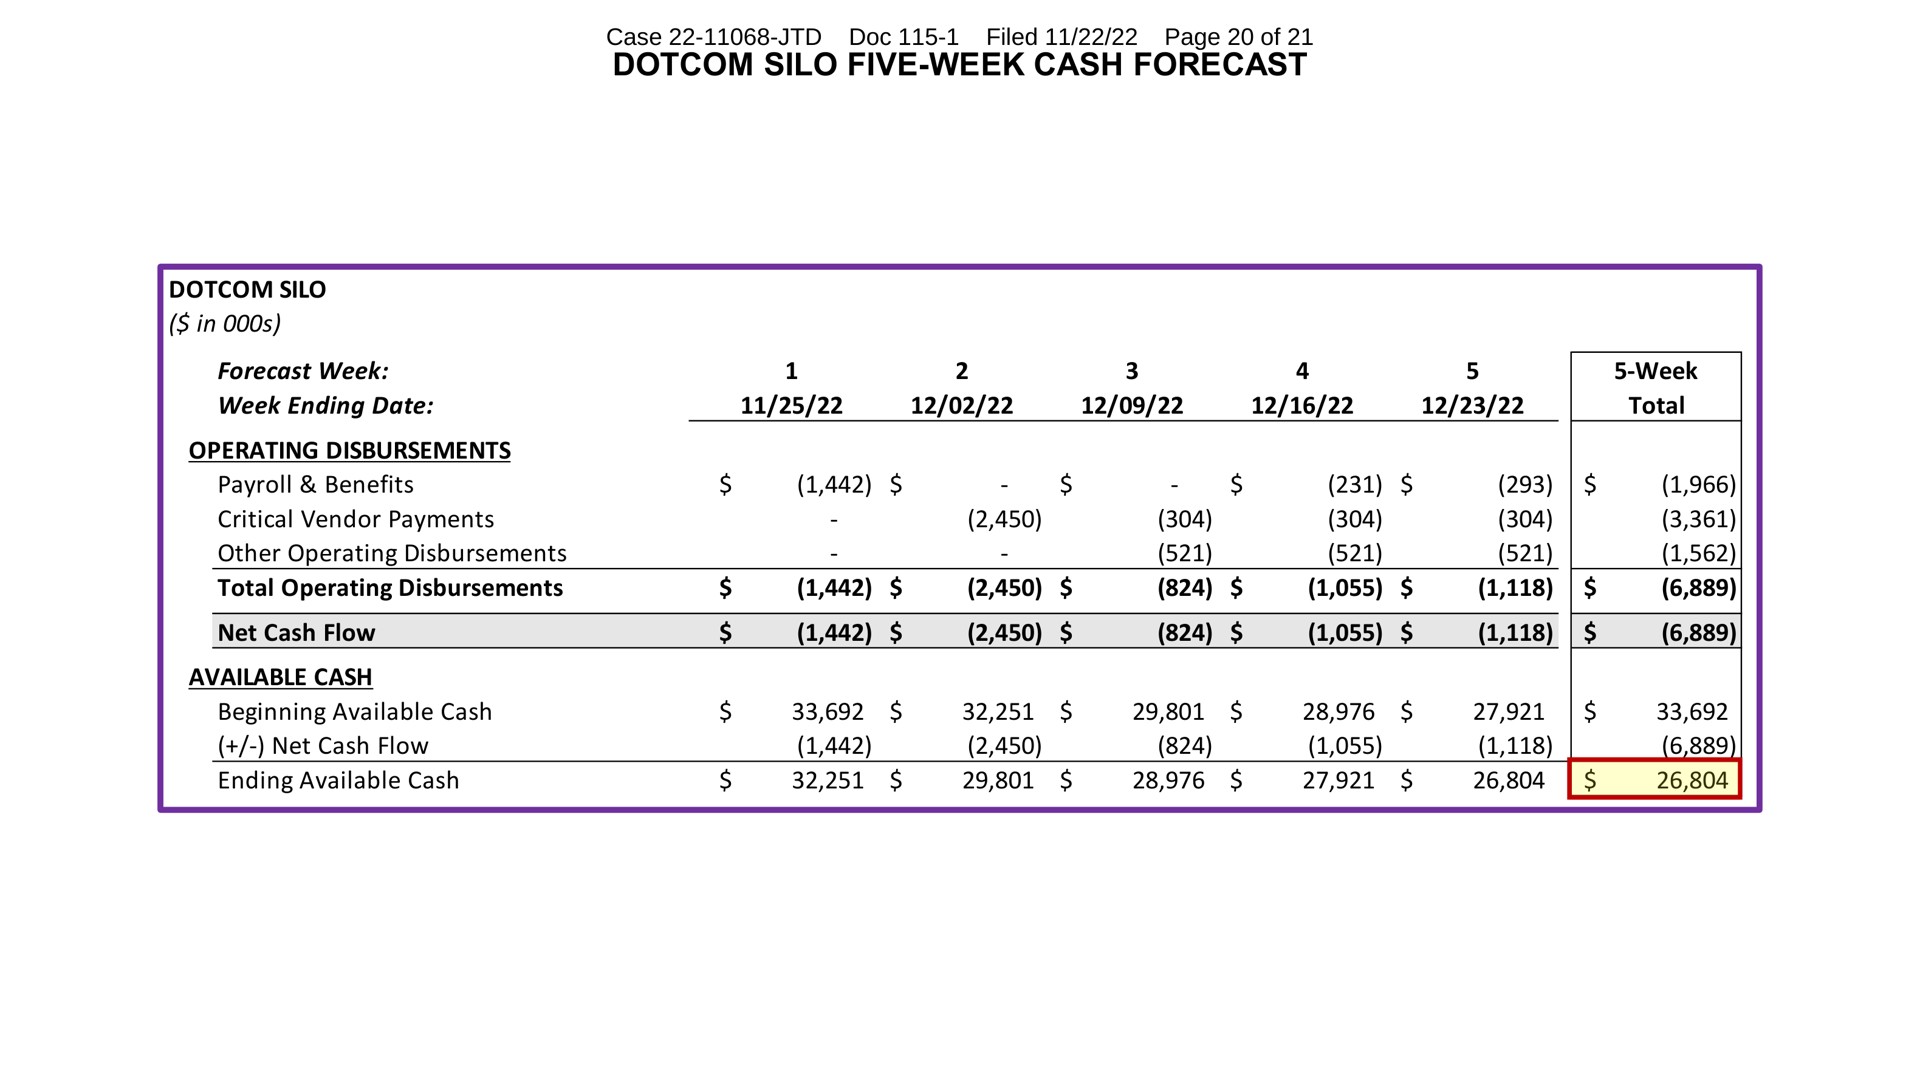 silo five week cash forecast week total silo in forecast week week ending date operating disbursements payroll benefits critical vendor payments other operating disbursements total operating disbursements net cash flow available cash beginning available cash a net cash flow ending available cash page of case filed doc | FTX Trading